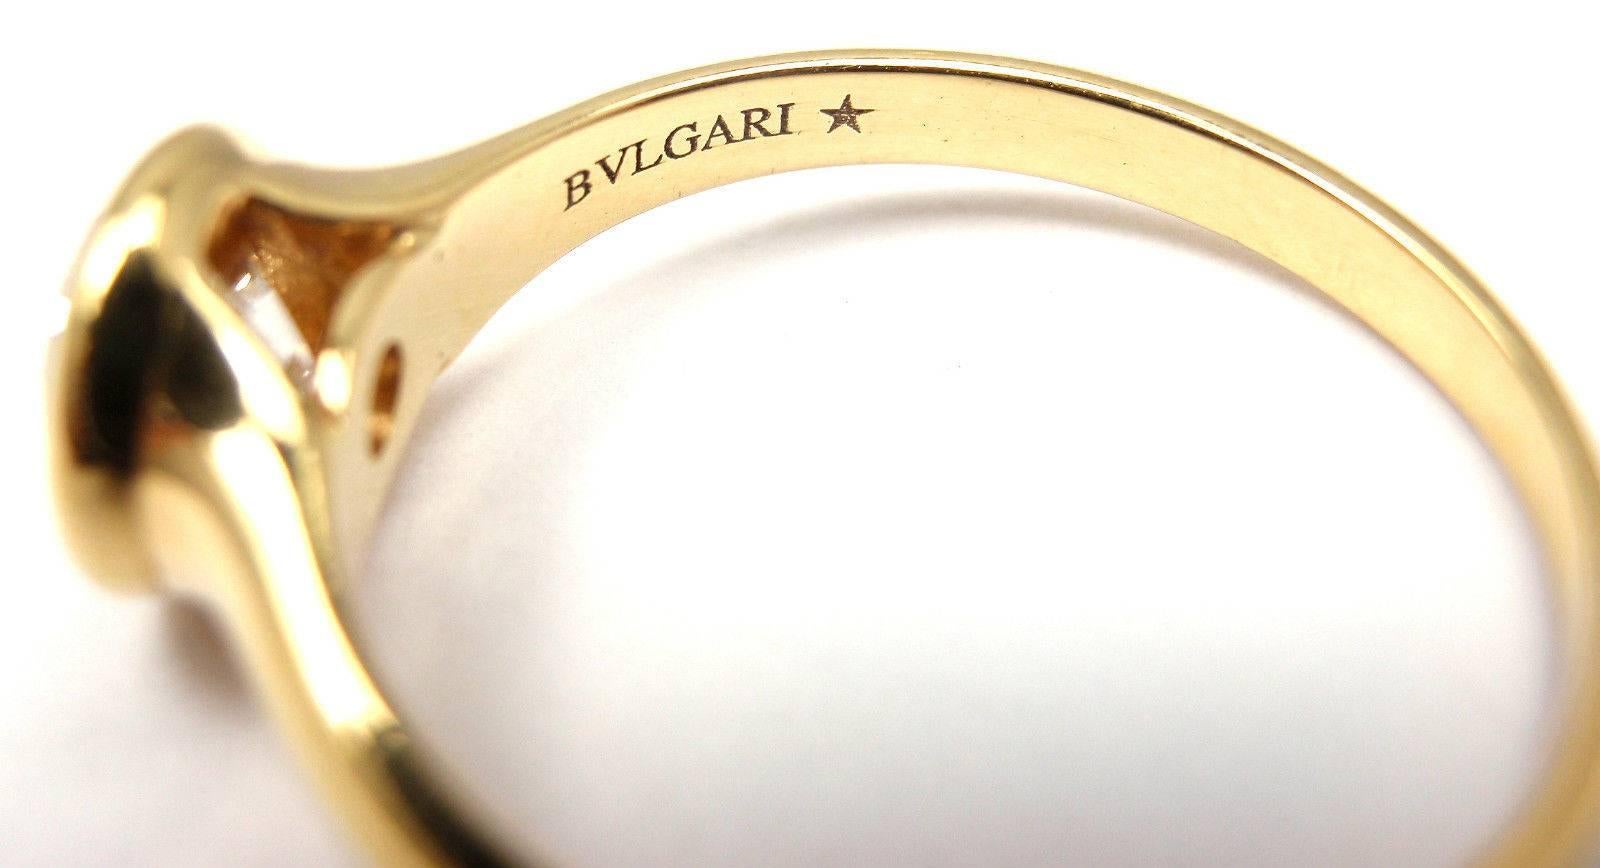 18k Yellow Gold Diamond Solitaire Engagement Ring by Bulgari. 
With 1 round brilliant cut diamond .70ct VVS2 clarity, G color Polish Very Good 
Includes Bulgari box, Bulgari certificate and GIA diamond certificate.

Details:
Ring size: